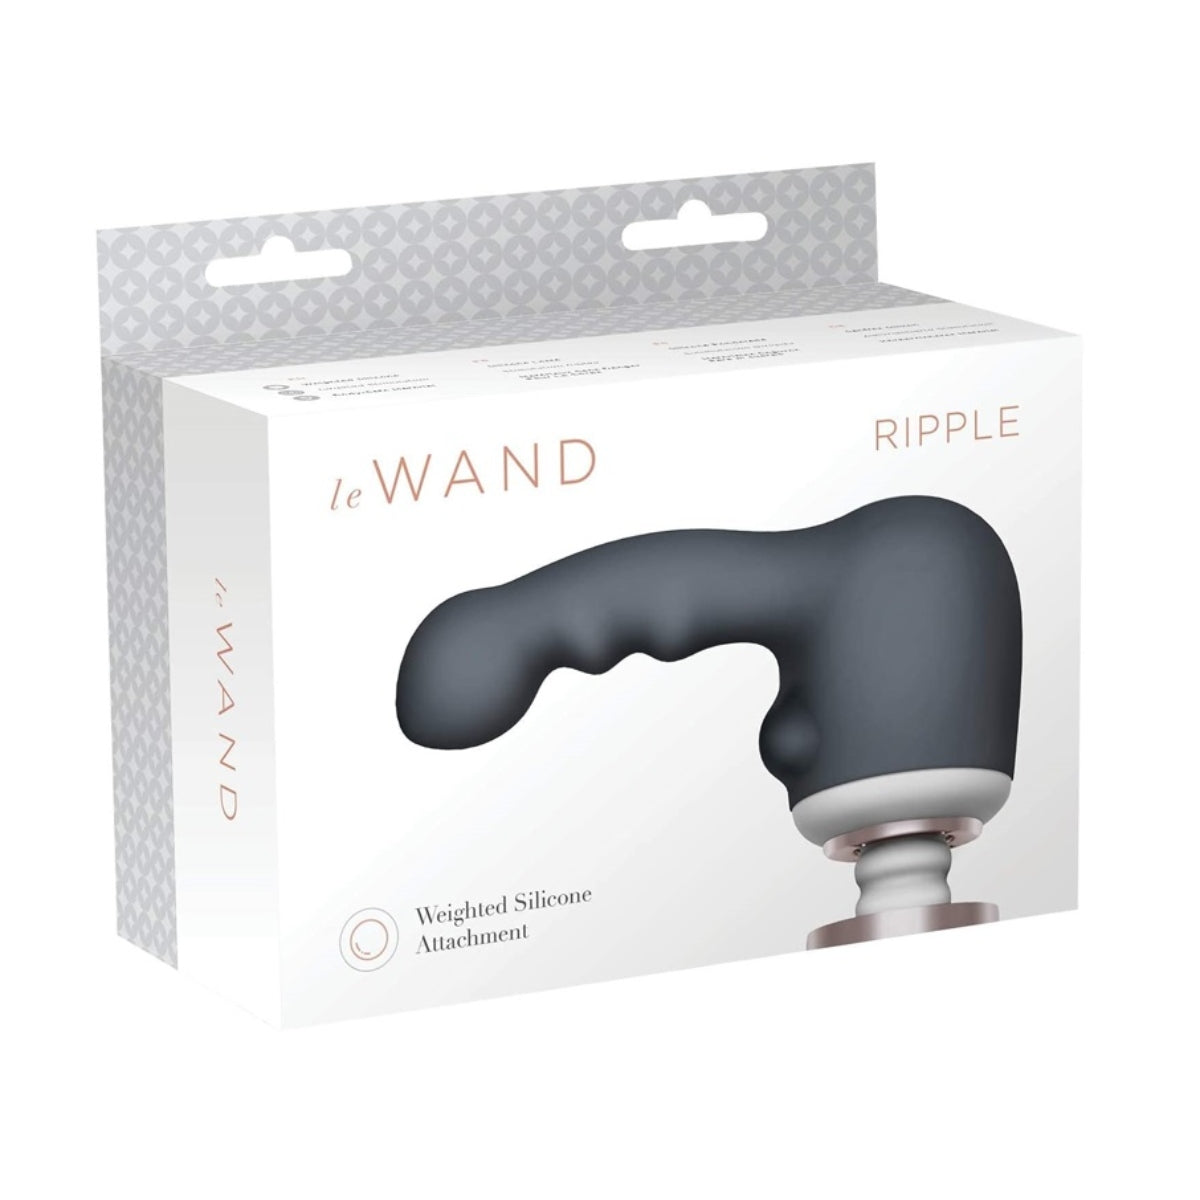 Le Wand Ripple Weighted Silicone Attachment Grey